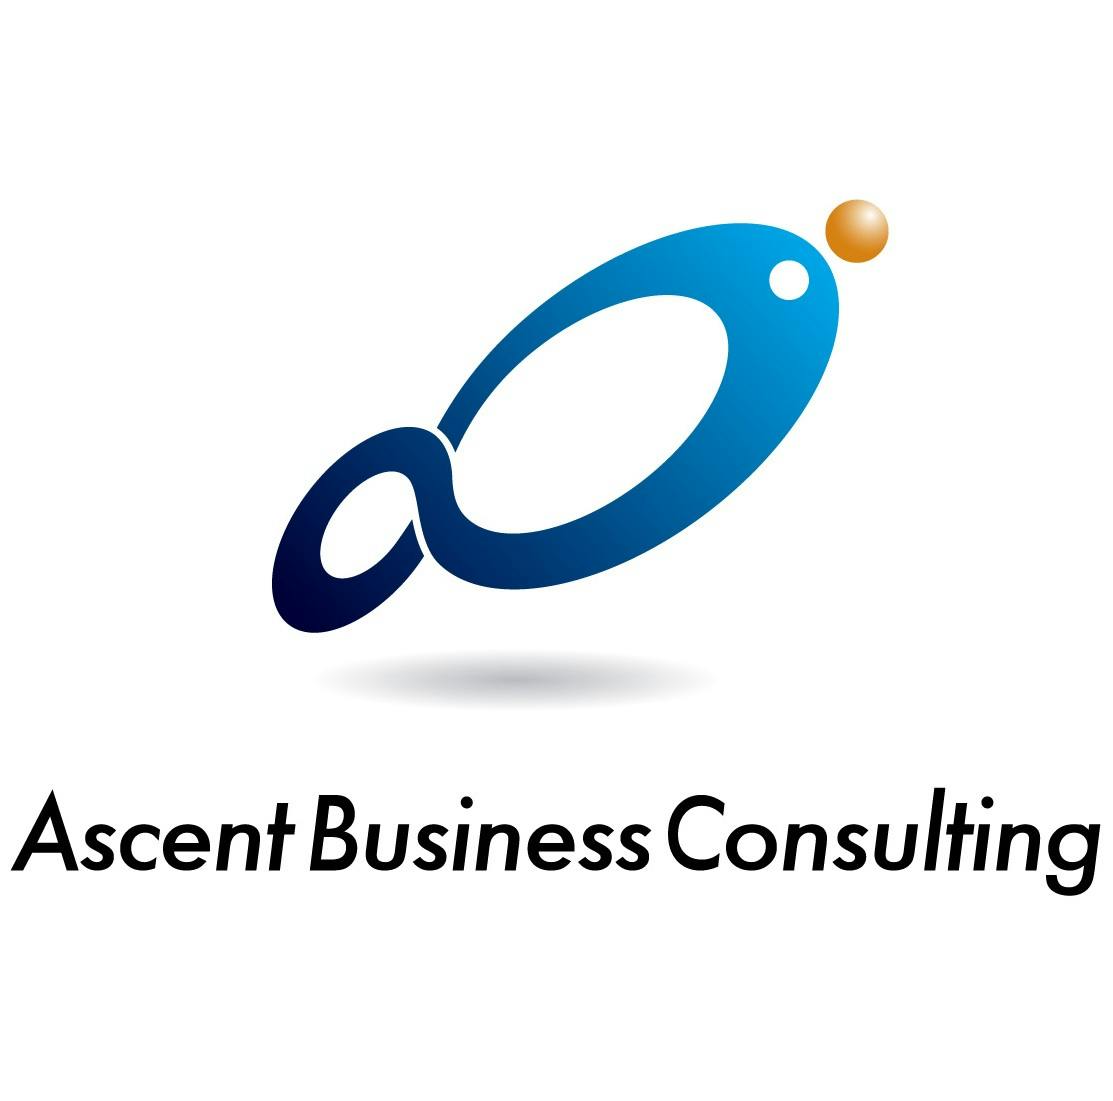 Ascent Business Consulting